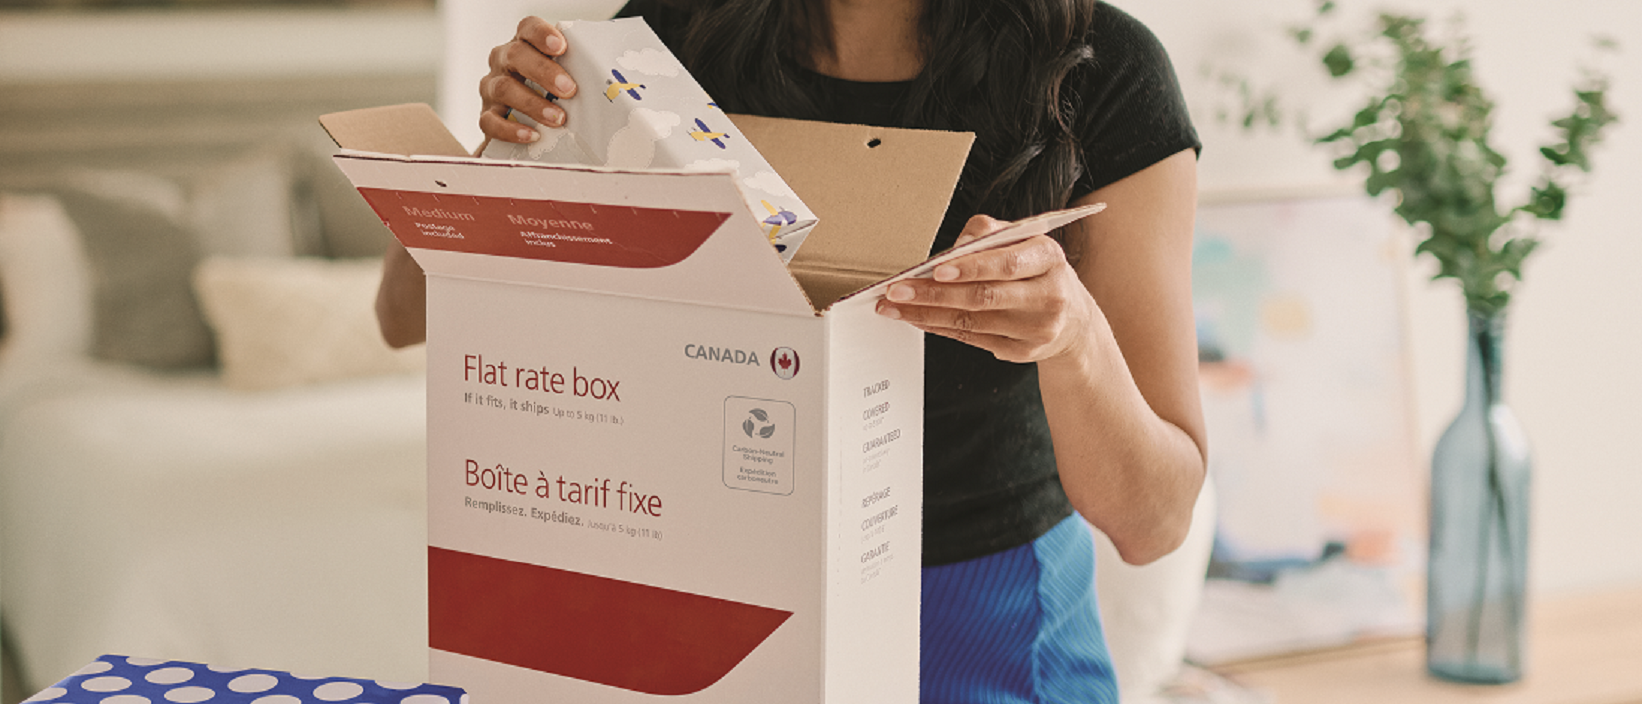 A woman buys a Canada Post flat rate box at a post office counter.